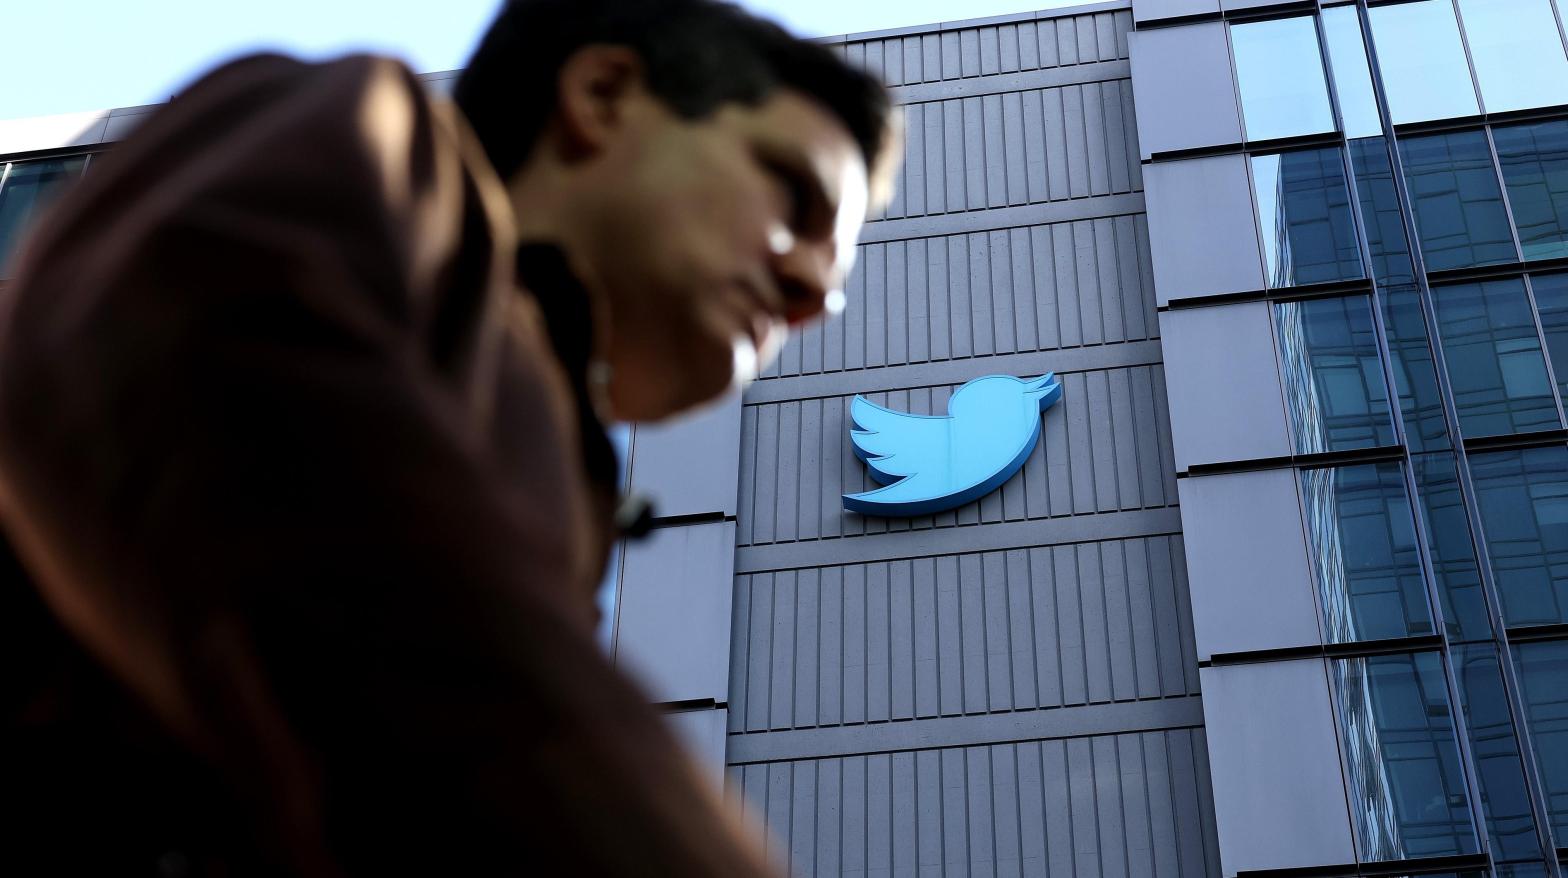 Twitter's headquarters could be investigated by San Francisco building inspectors over allegations it illegally converted some of its space into bedrooms. (Photo: Justin Sullivan, Getty Images)